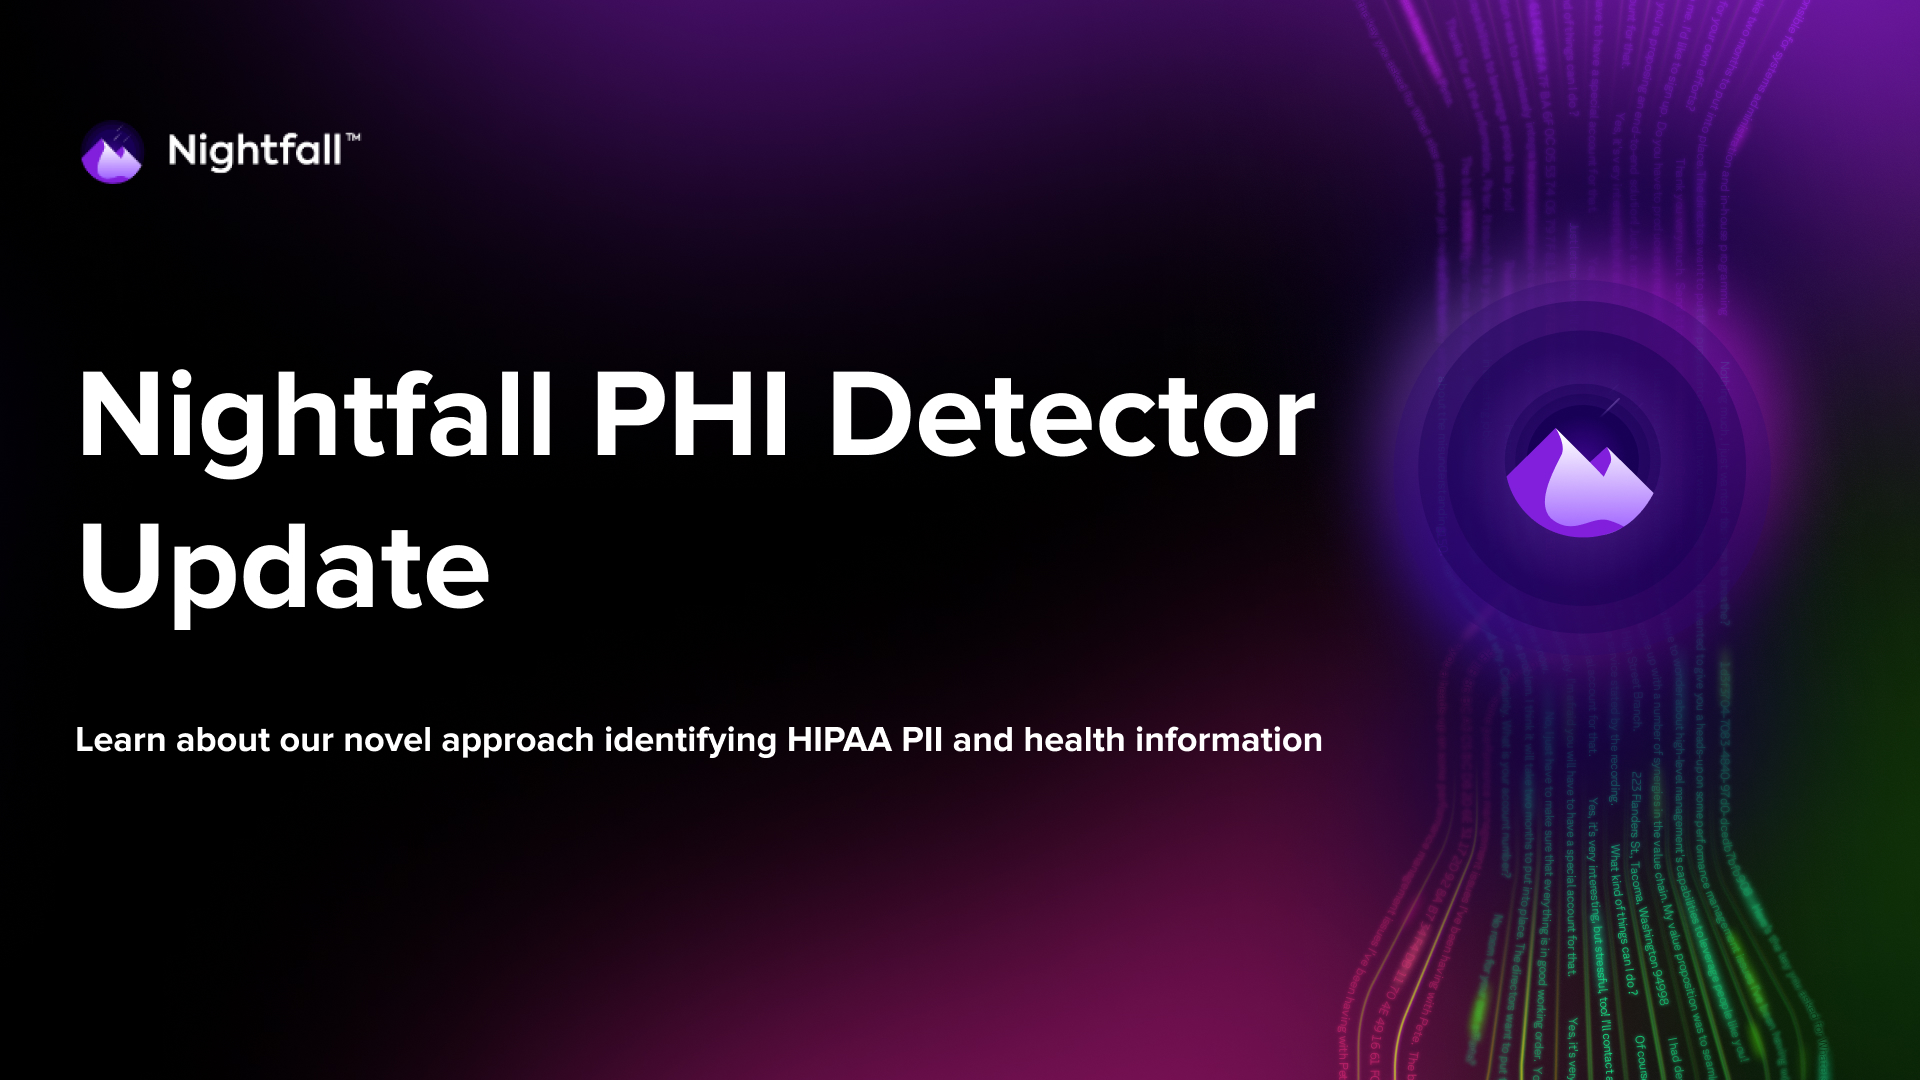 Nightfall’s New PHI Detector Improves Security Automation for Healthcare Orgs